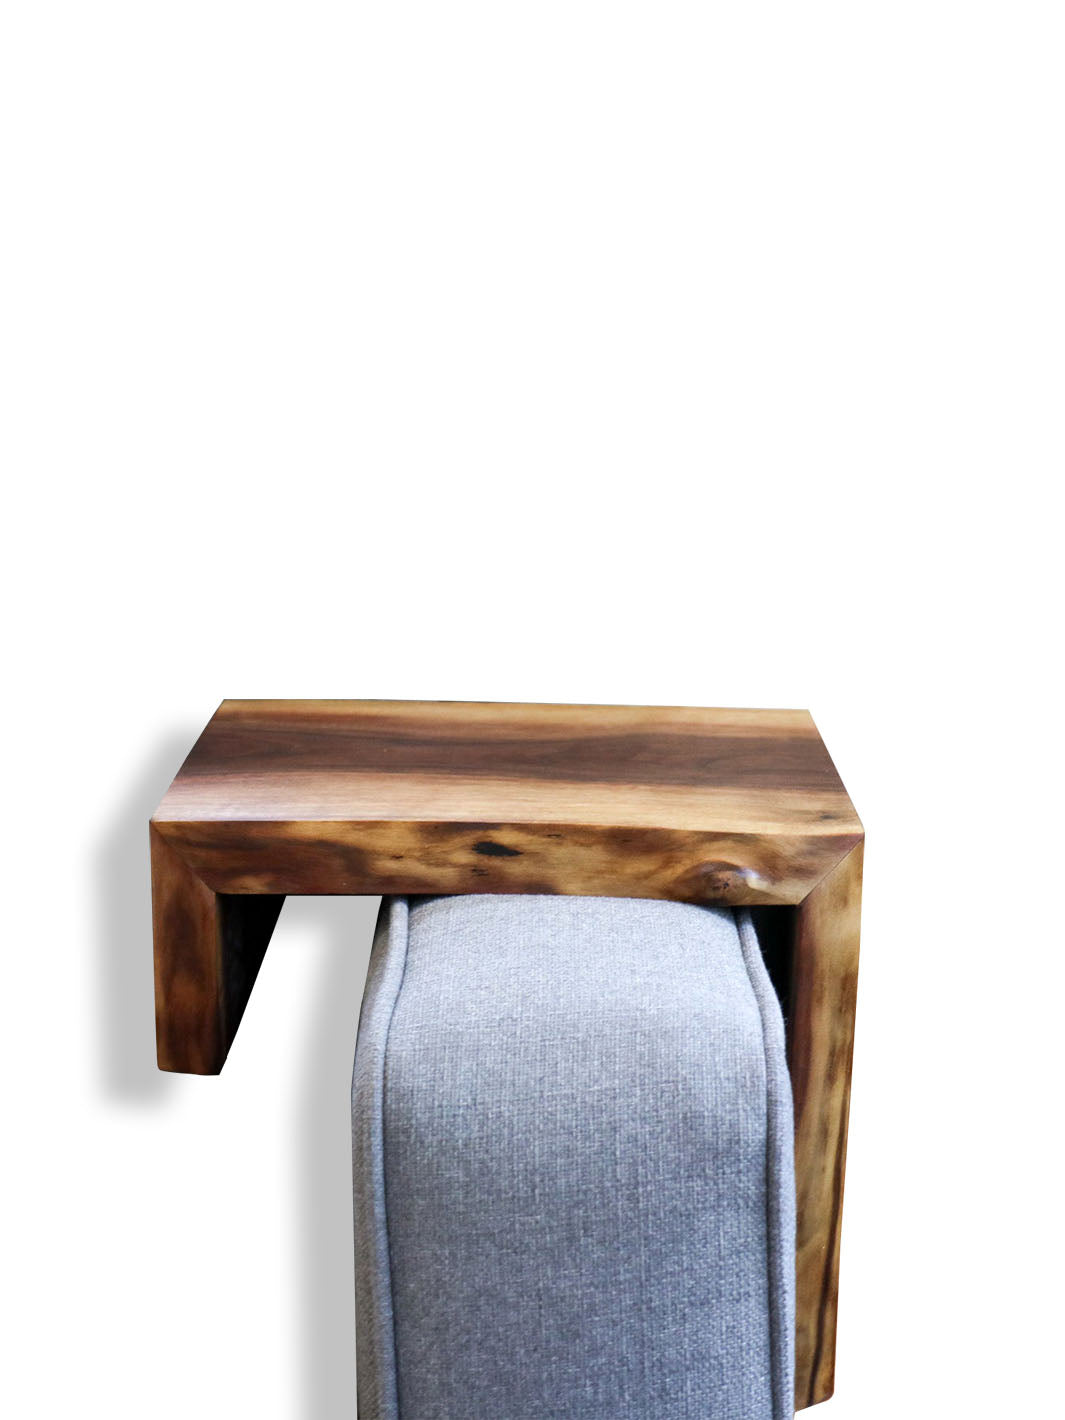 Pair of Live Edge 8" Walnut Wood Armrest Tables (in stock) Earthly Comfort Coffee Tables 2235-1